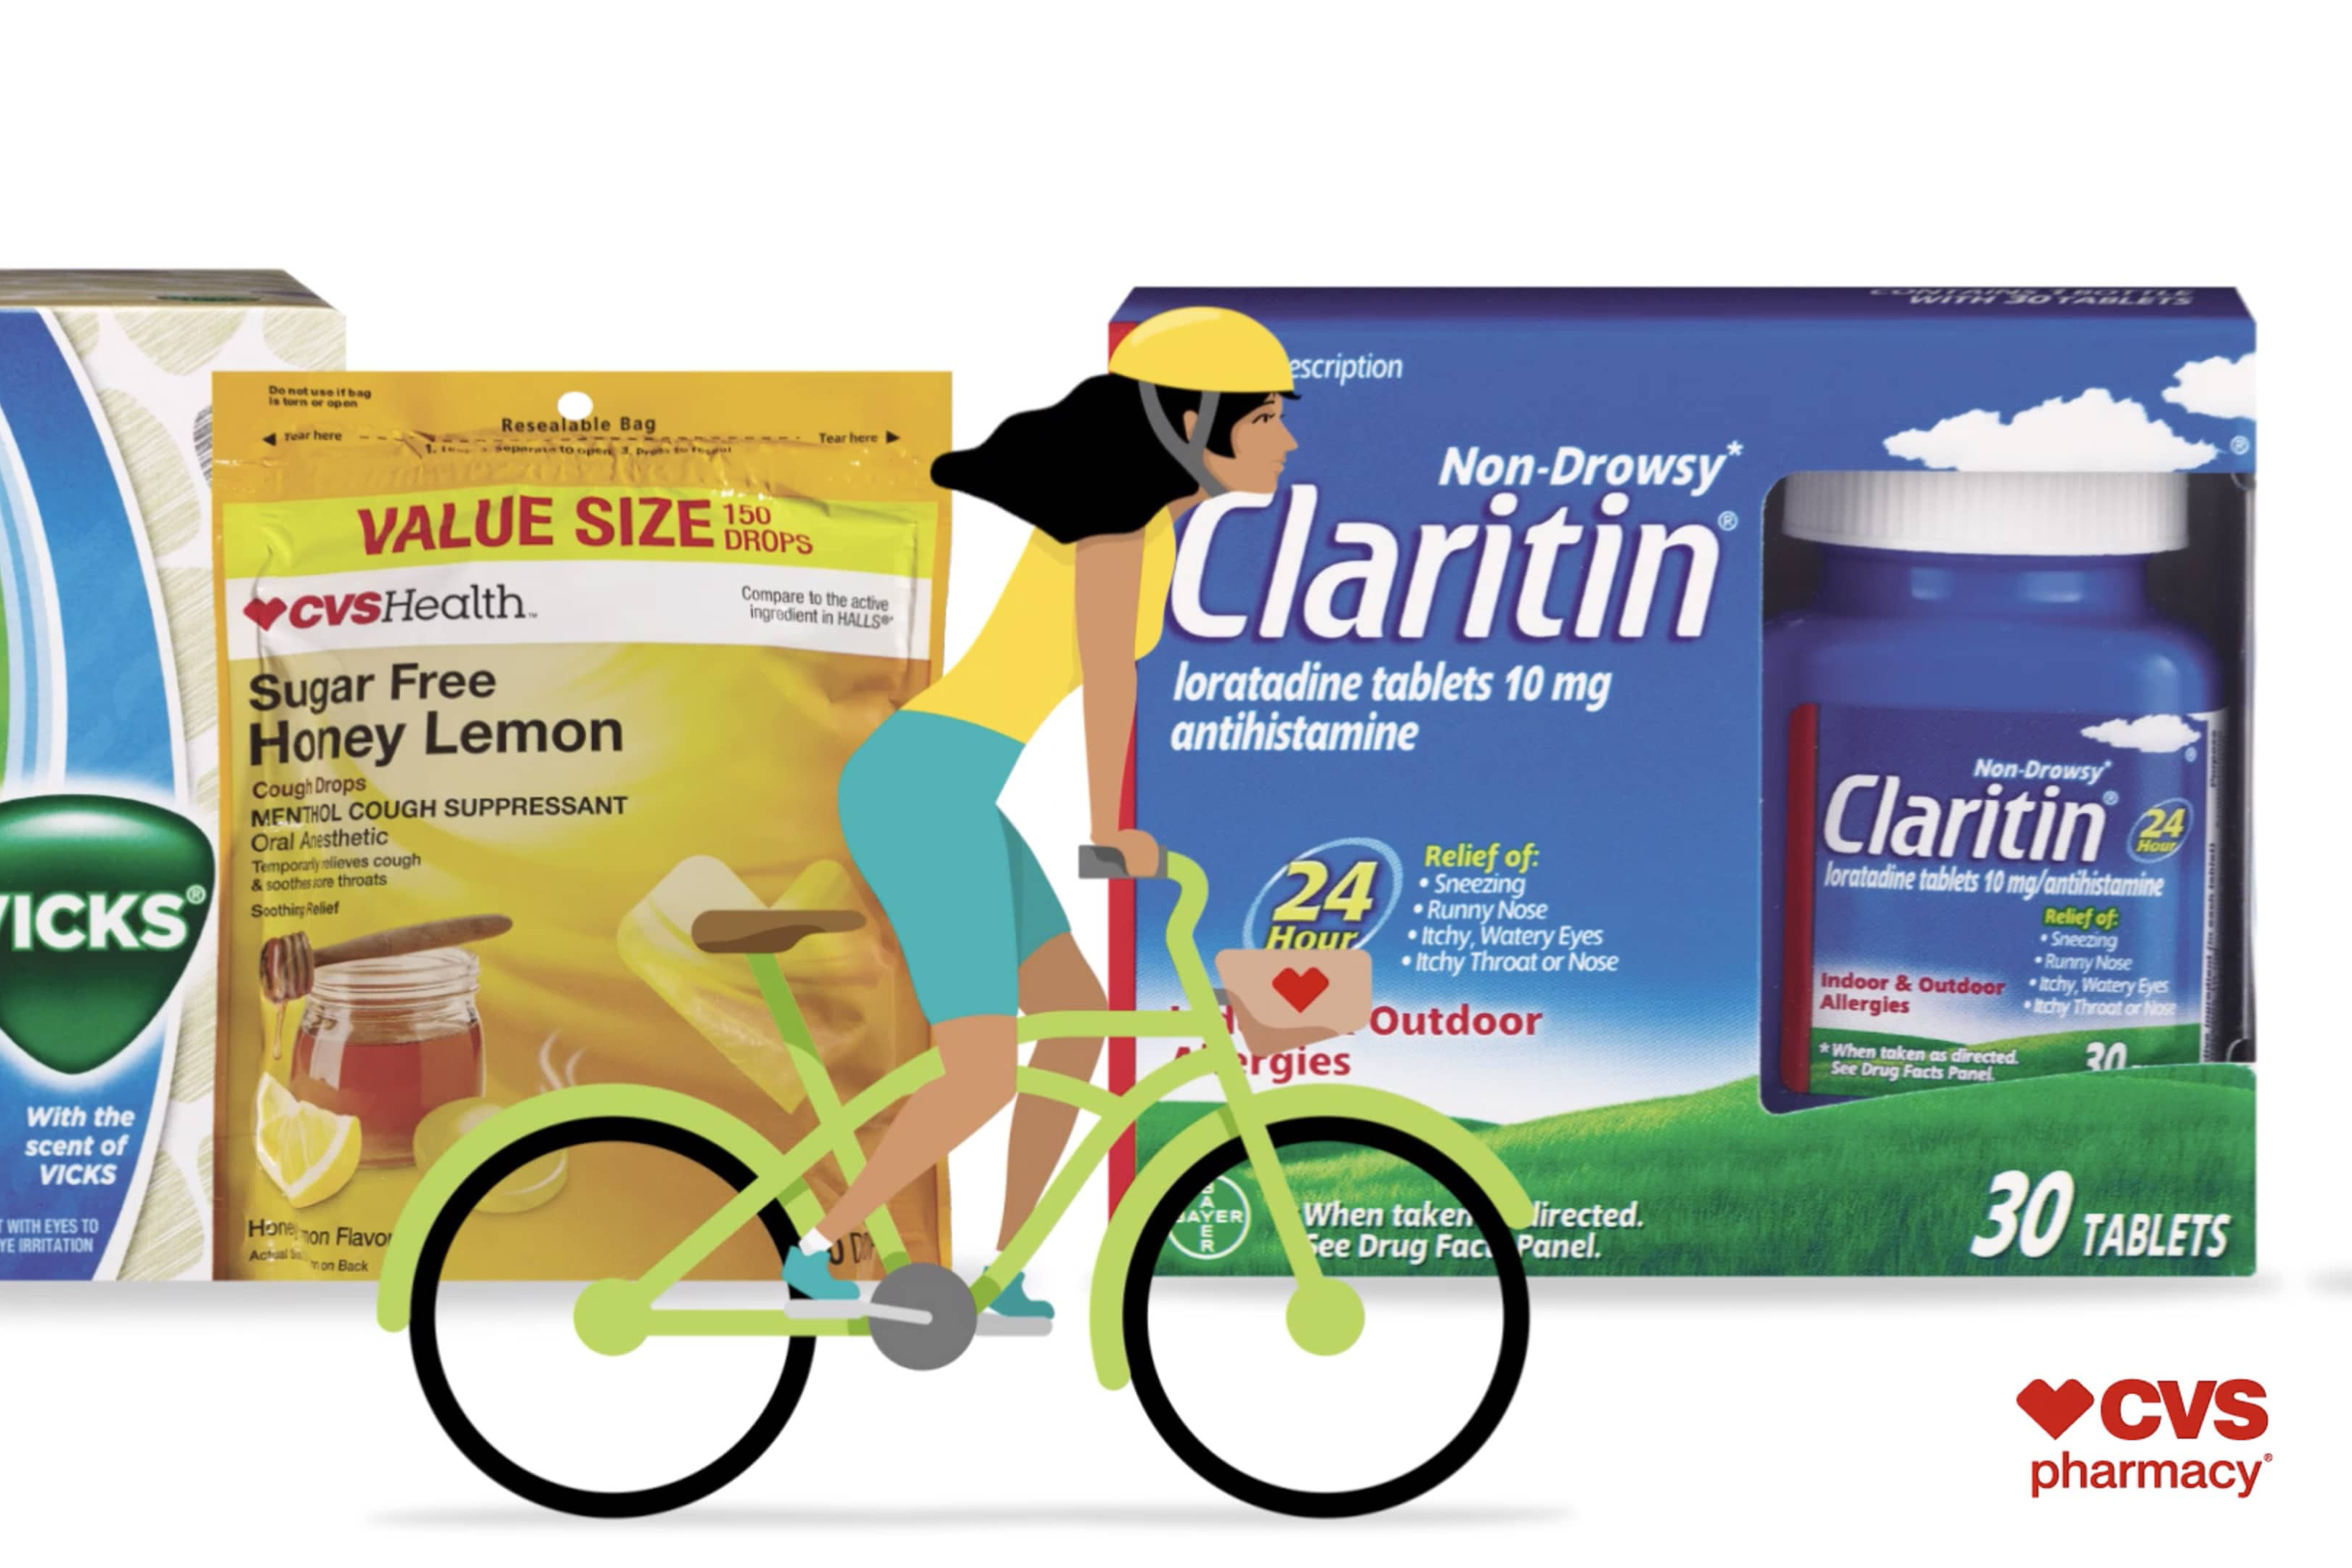 A woman on a bicycle rides past several allergy products, including Puffs tissues with Vick's, CVS Health honey lemon cough drops, and Claritin.